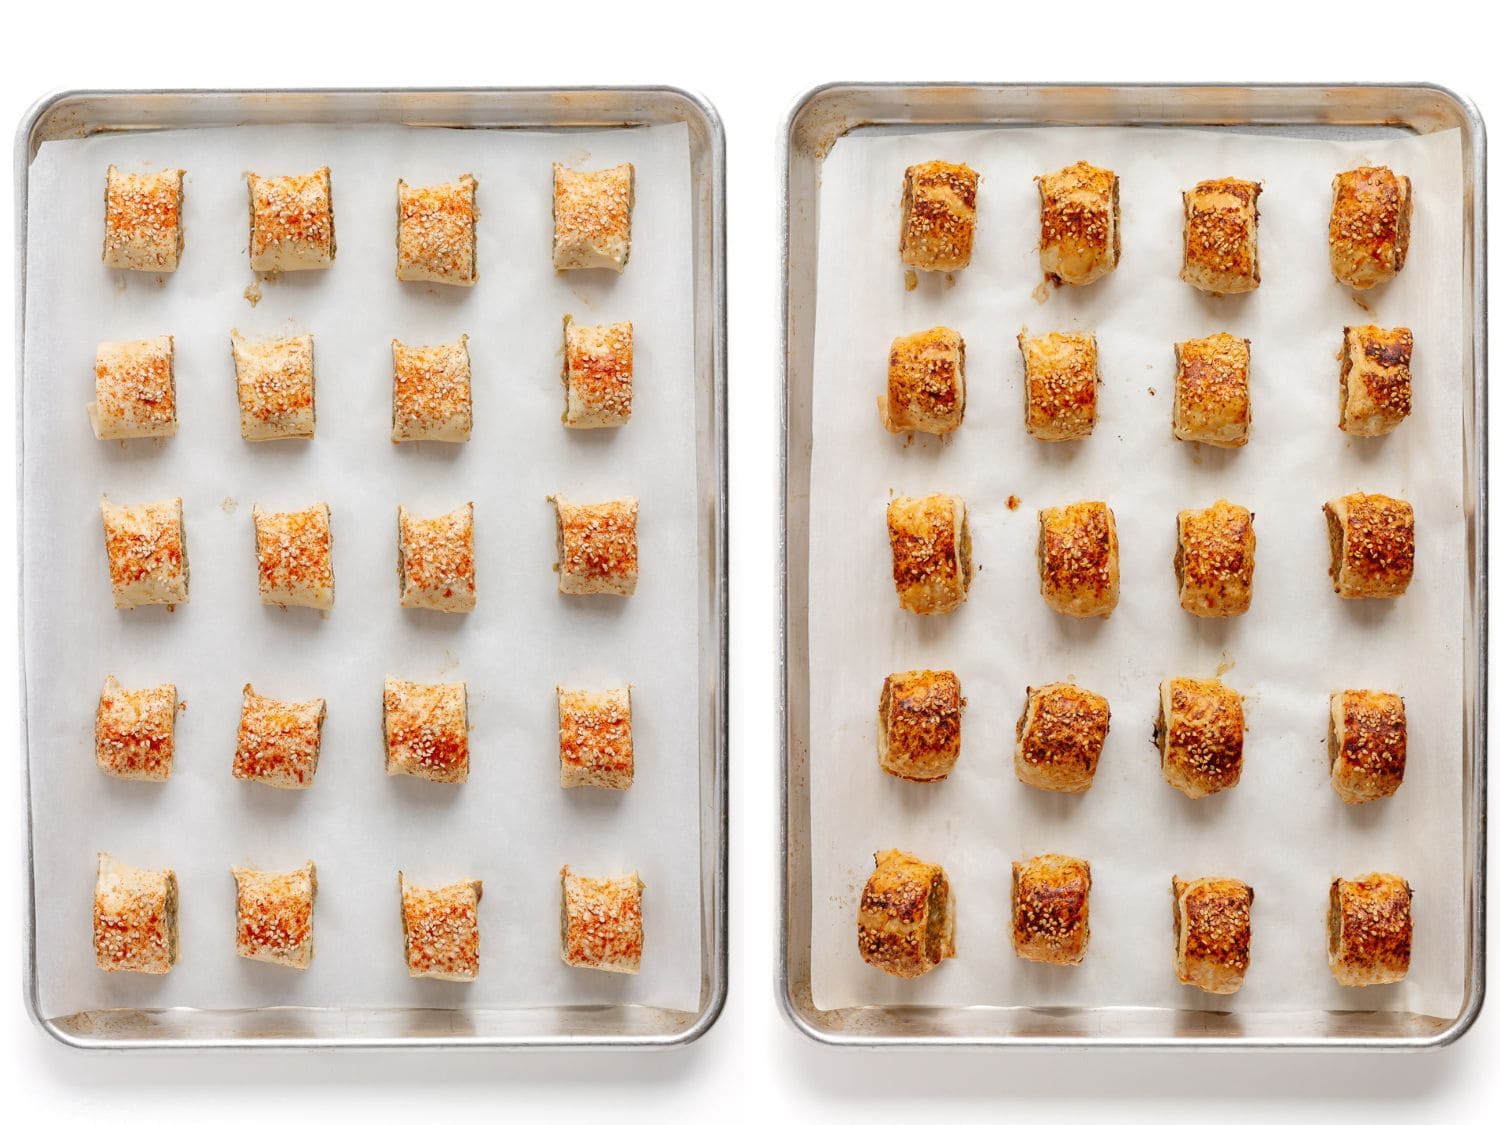 Photo collage showing party size chicken sausage rolls on a baking sheet before and after baking.